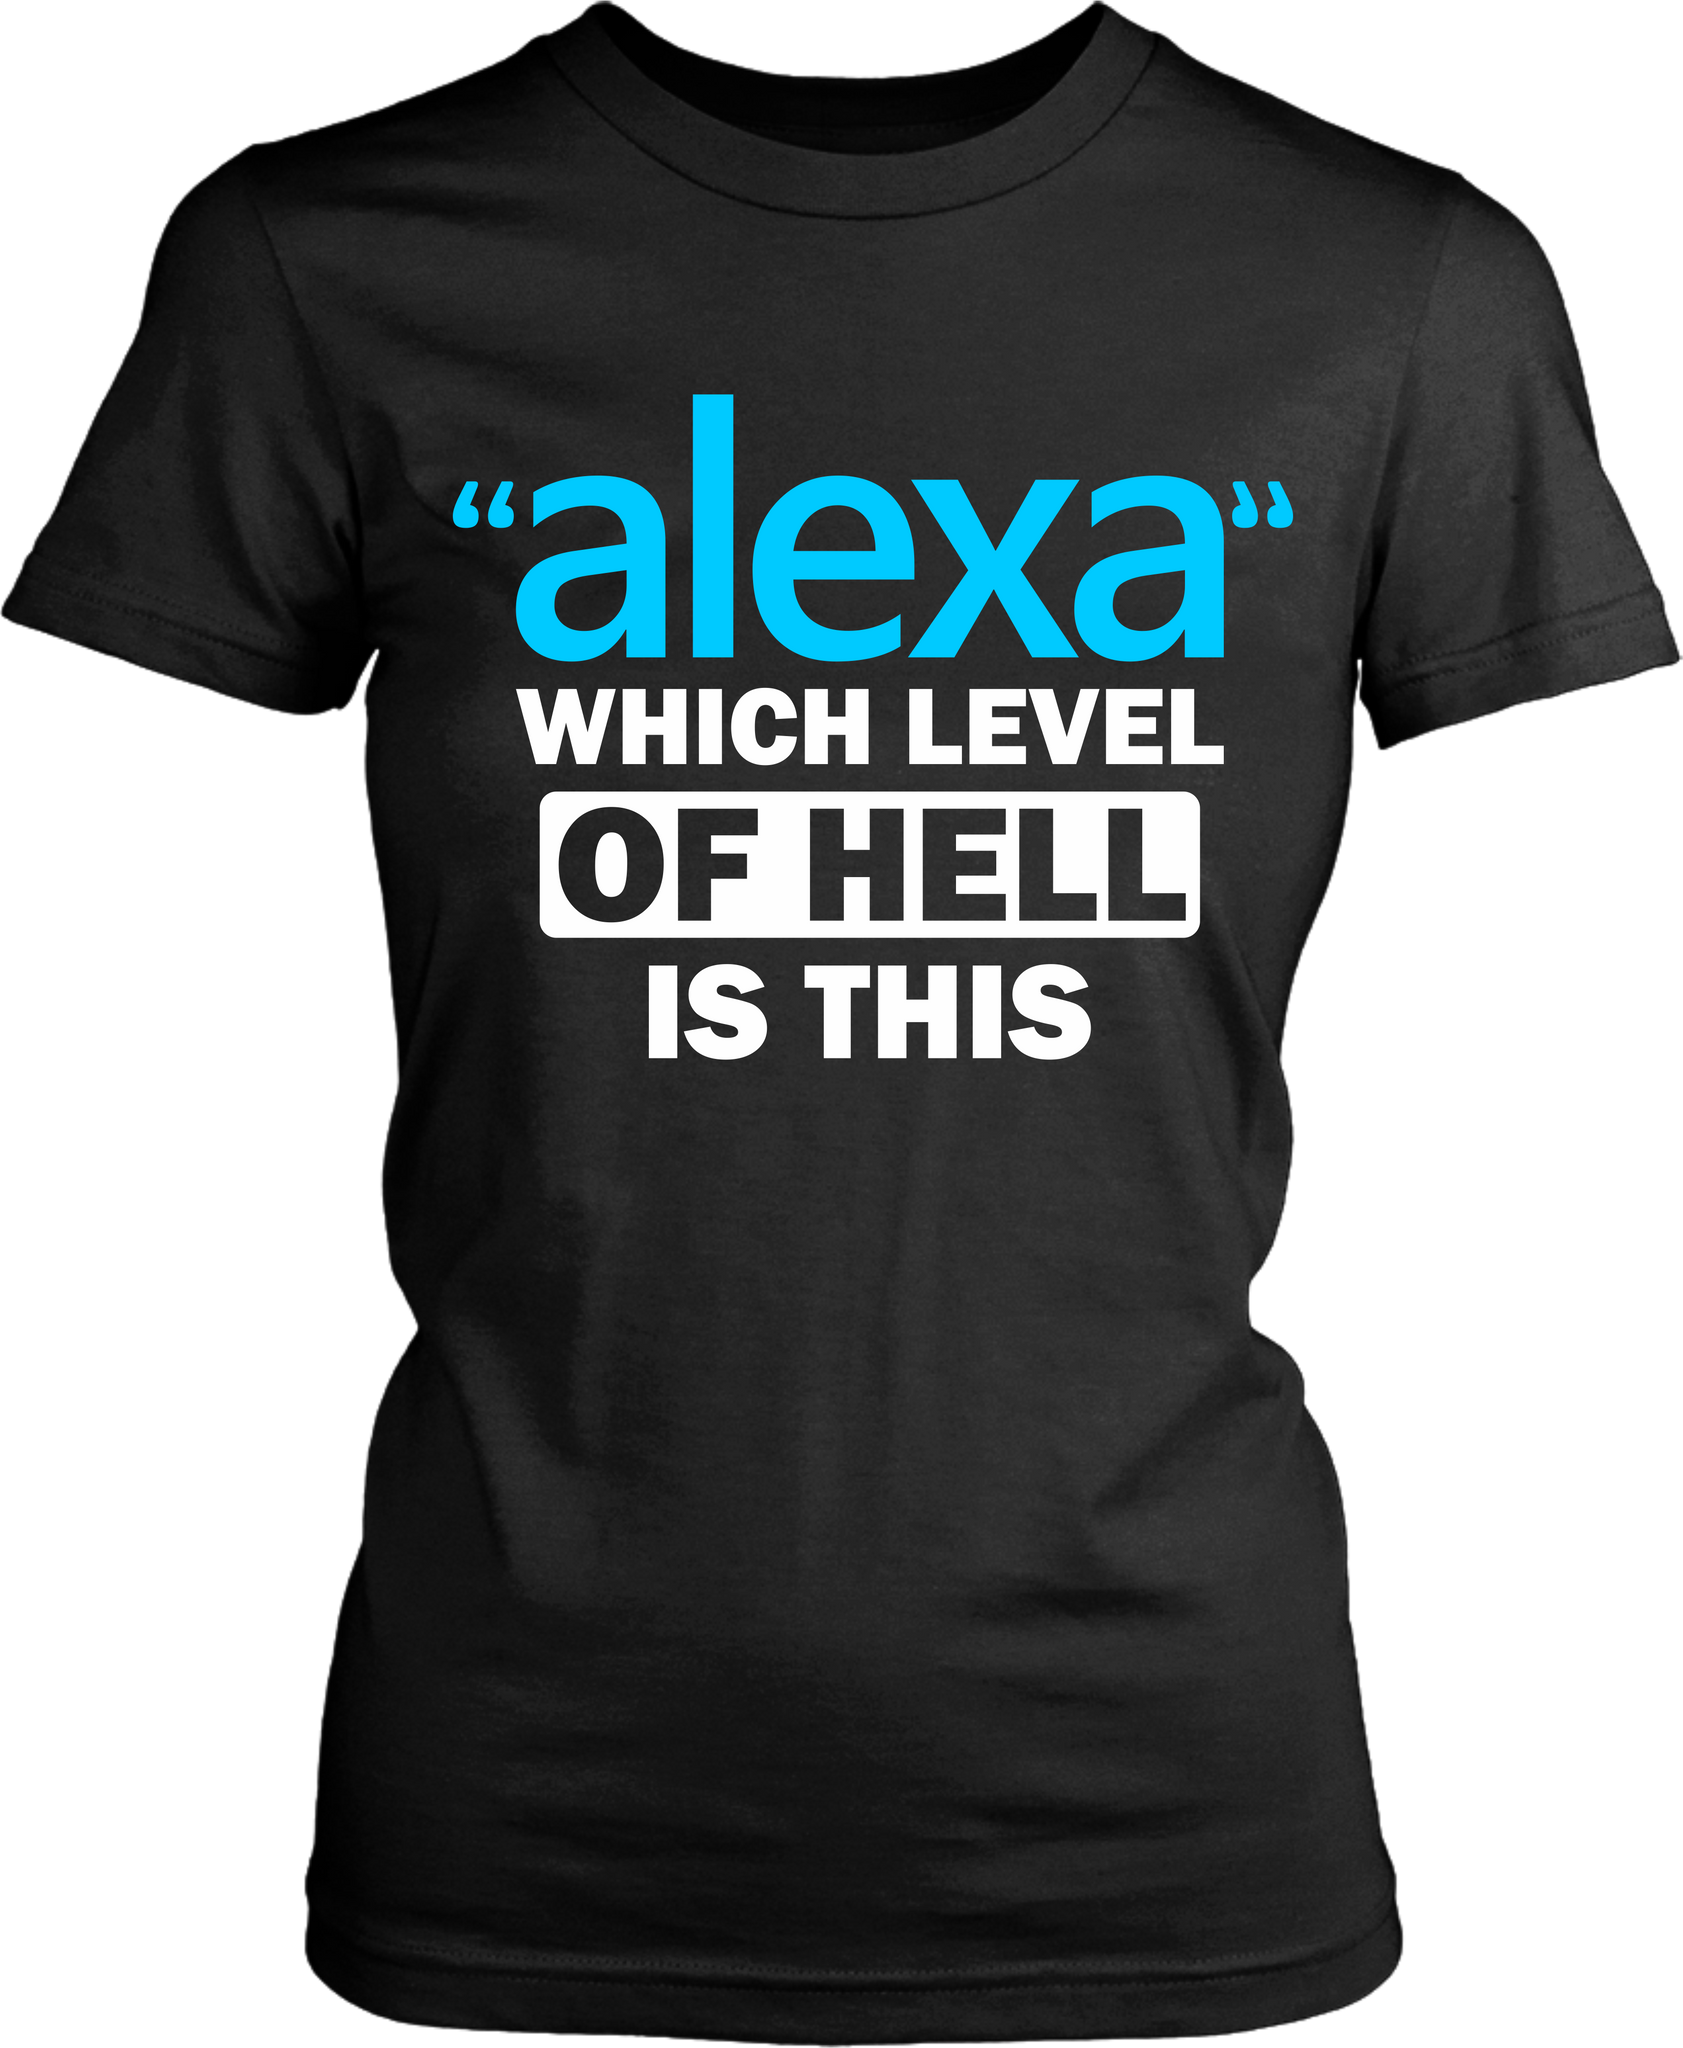 Black T-shirt mock-up with funny, sarcastic Alexa question "Alexa" which level of hell is this t-shirt design, available from the Xpert Apparel Store.